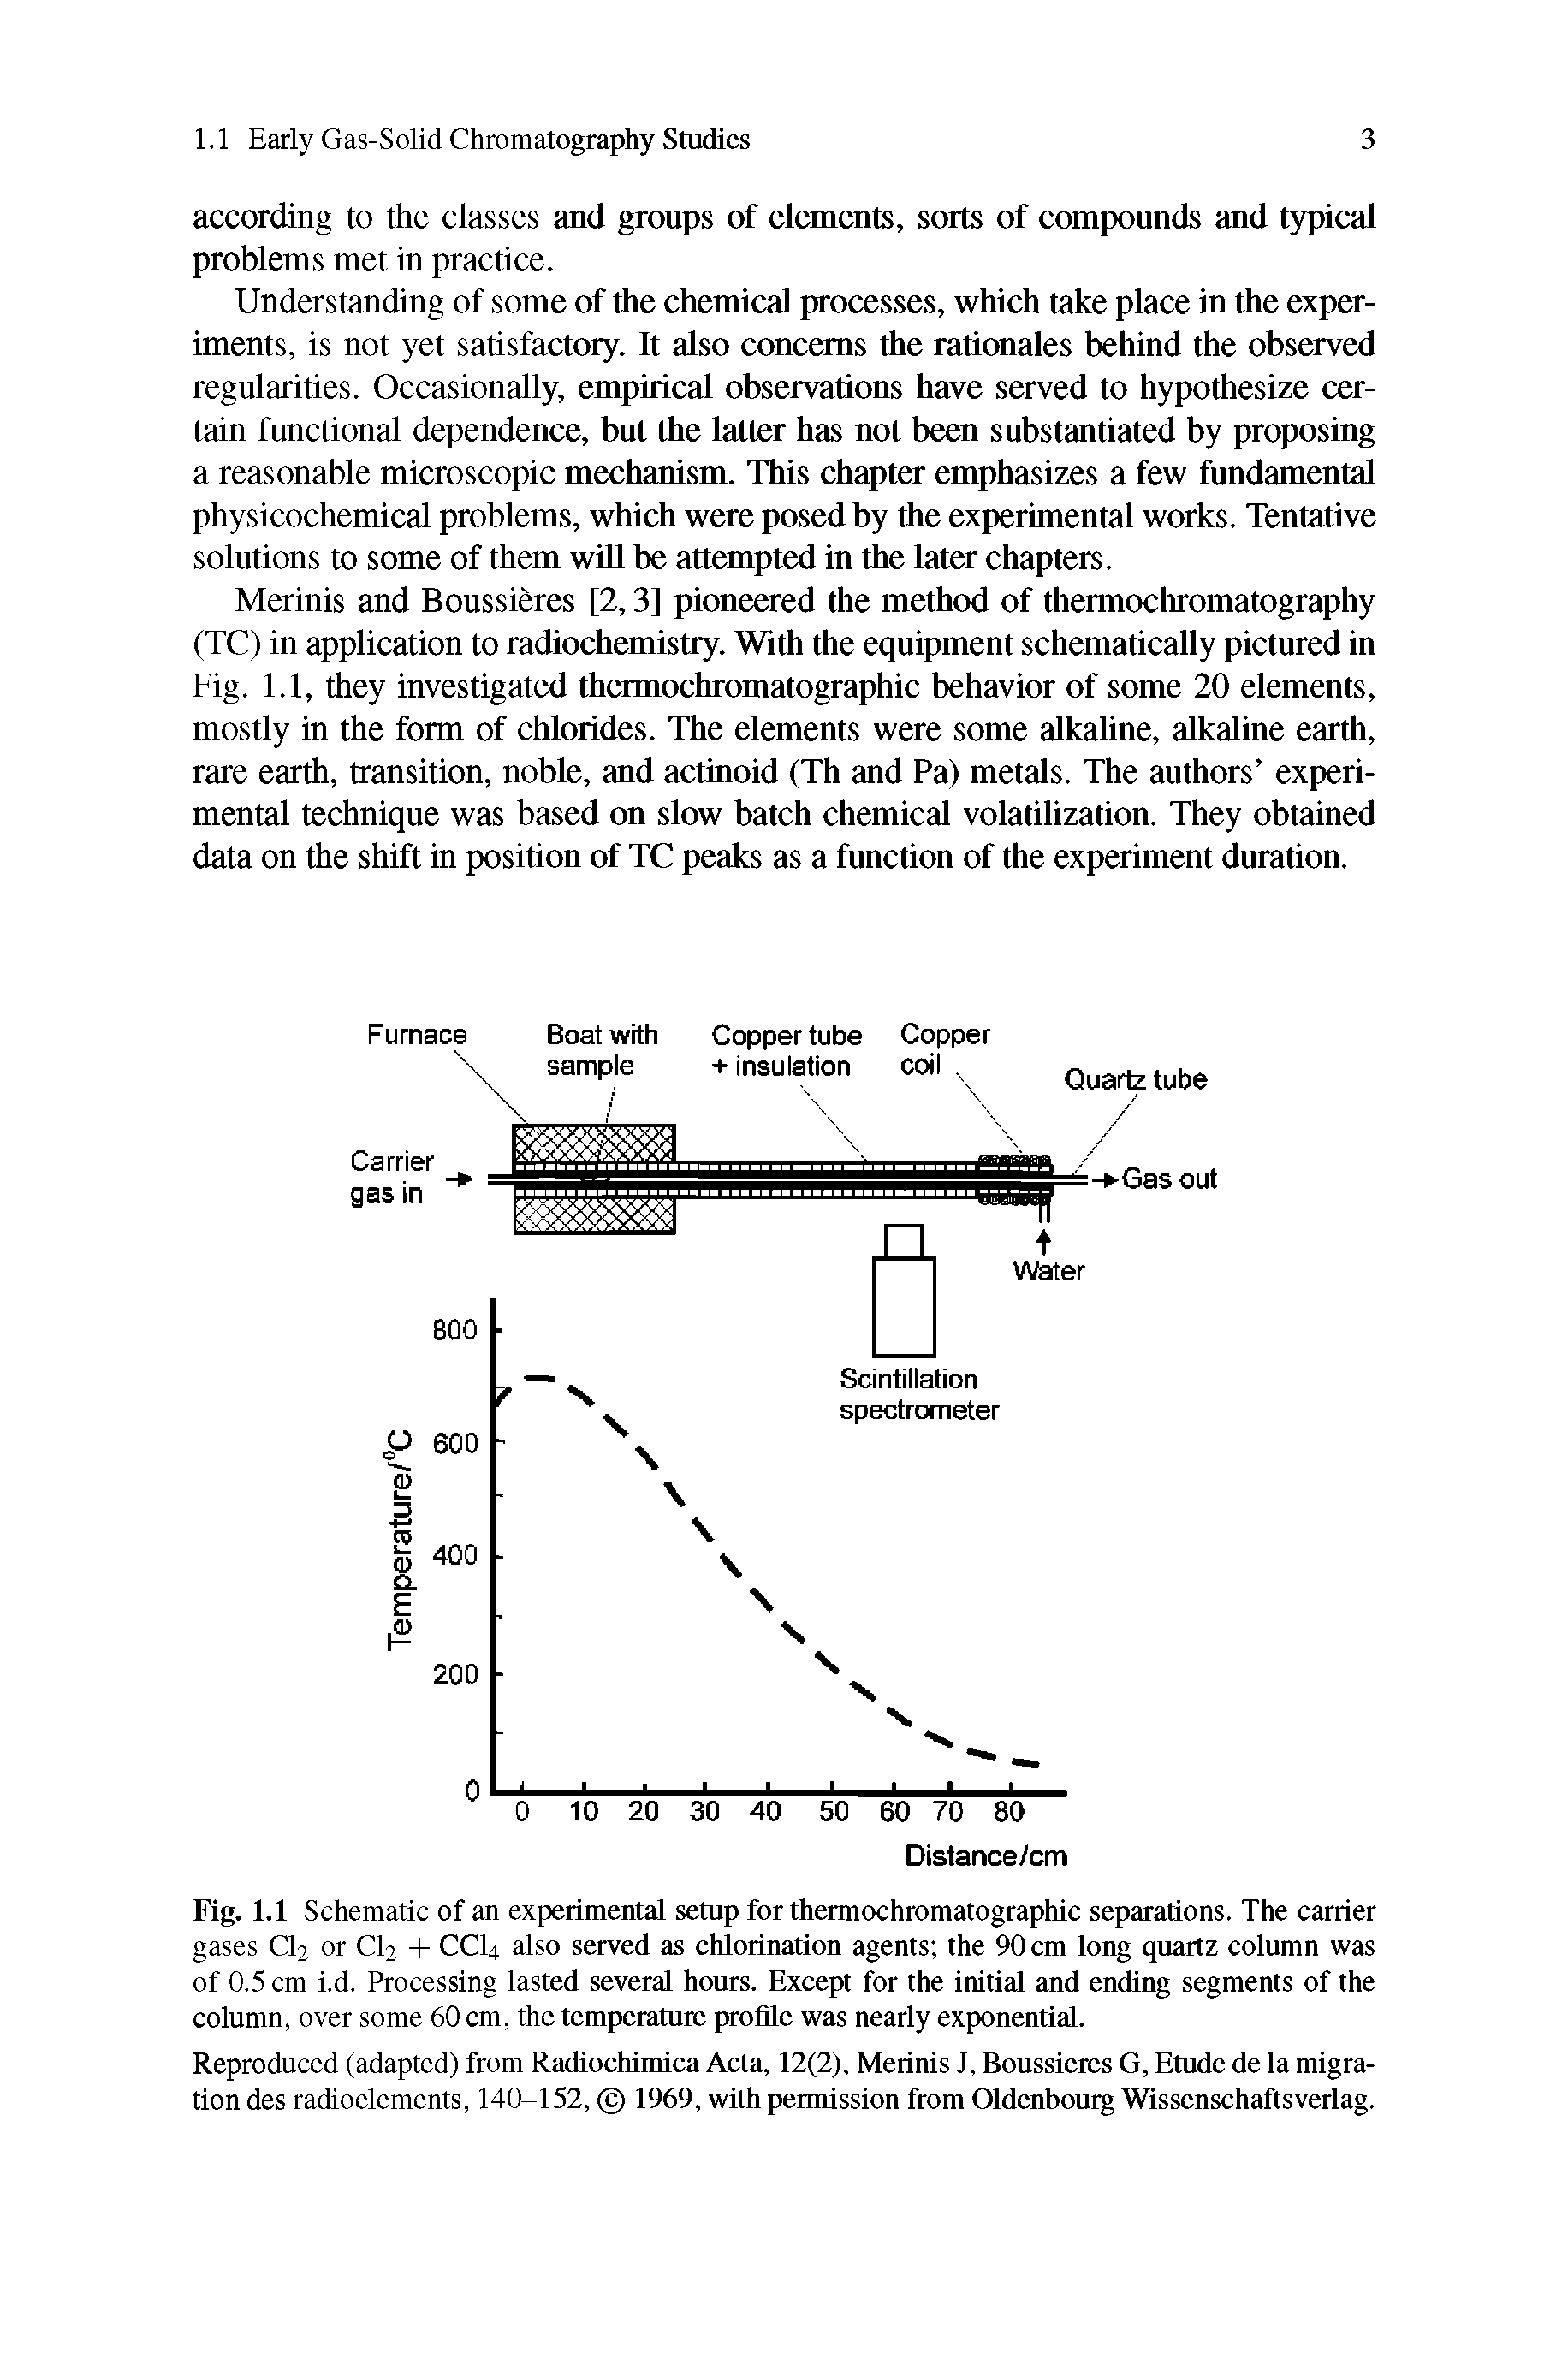 Fig. 1.1 Schematic of an experimental setup for thermochromatographic separations. The carrier gases Cl2 or Cl2 + CCI4 also served as chlorination agents the 90 cm long quartz column was of 0.5 cm i.d. Processing lasted several hours. Except for the initial and ending segments of the column, over some 60 cm, the temperature profile was nearly exponential.